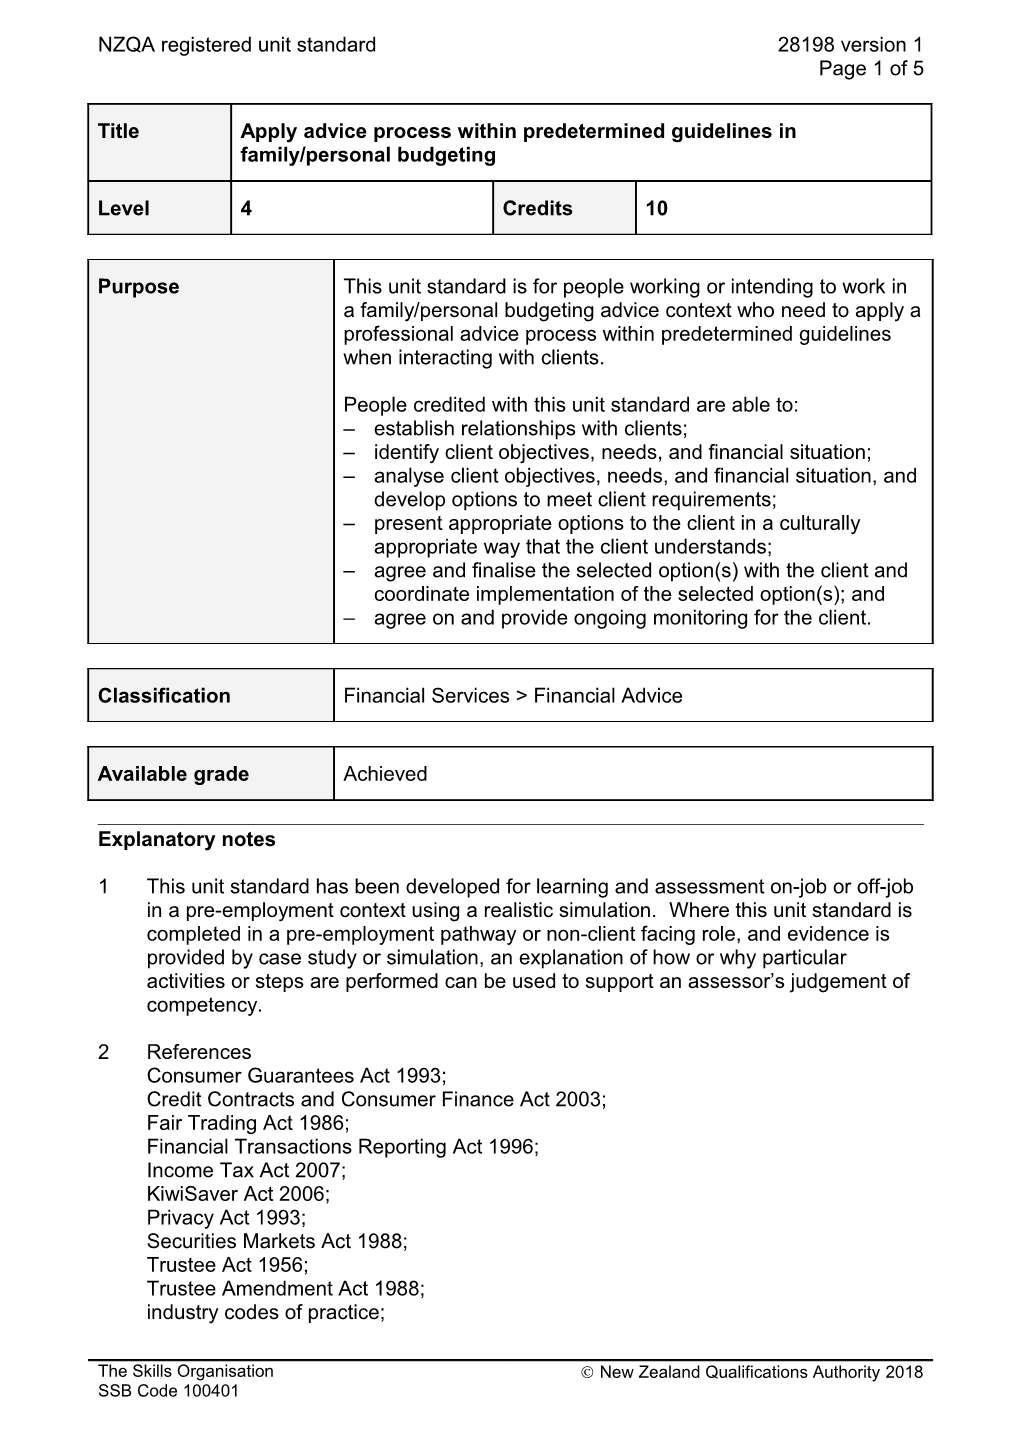 28198 Apply Advice Process Within Predetermined Guidelines in Family/Personal Budgeting